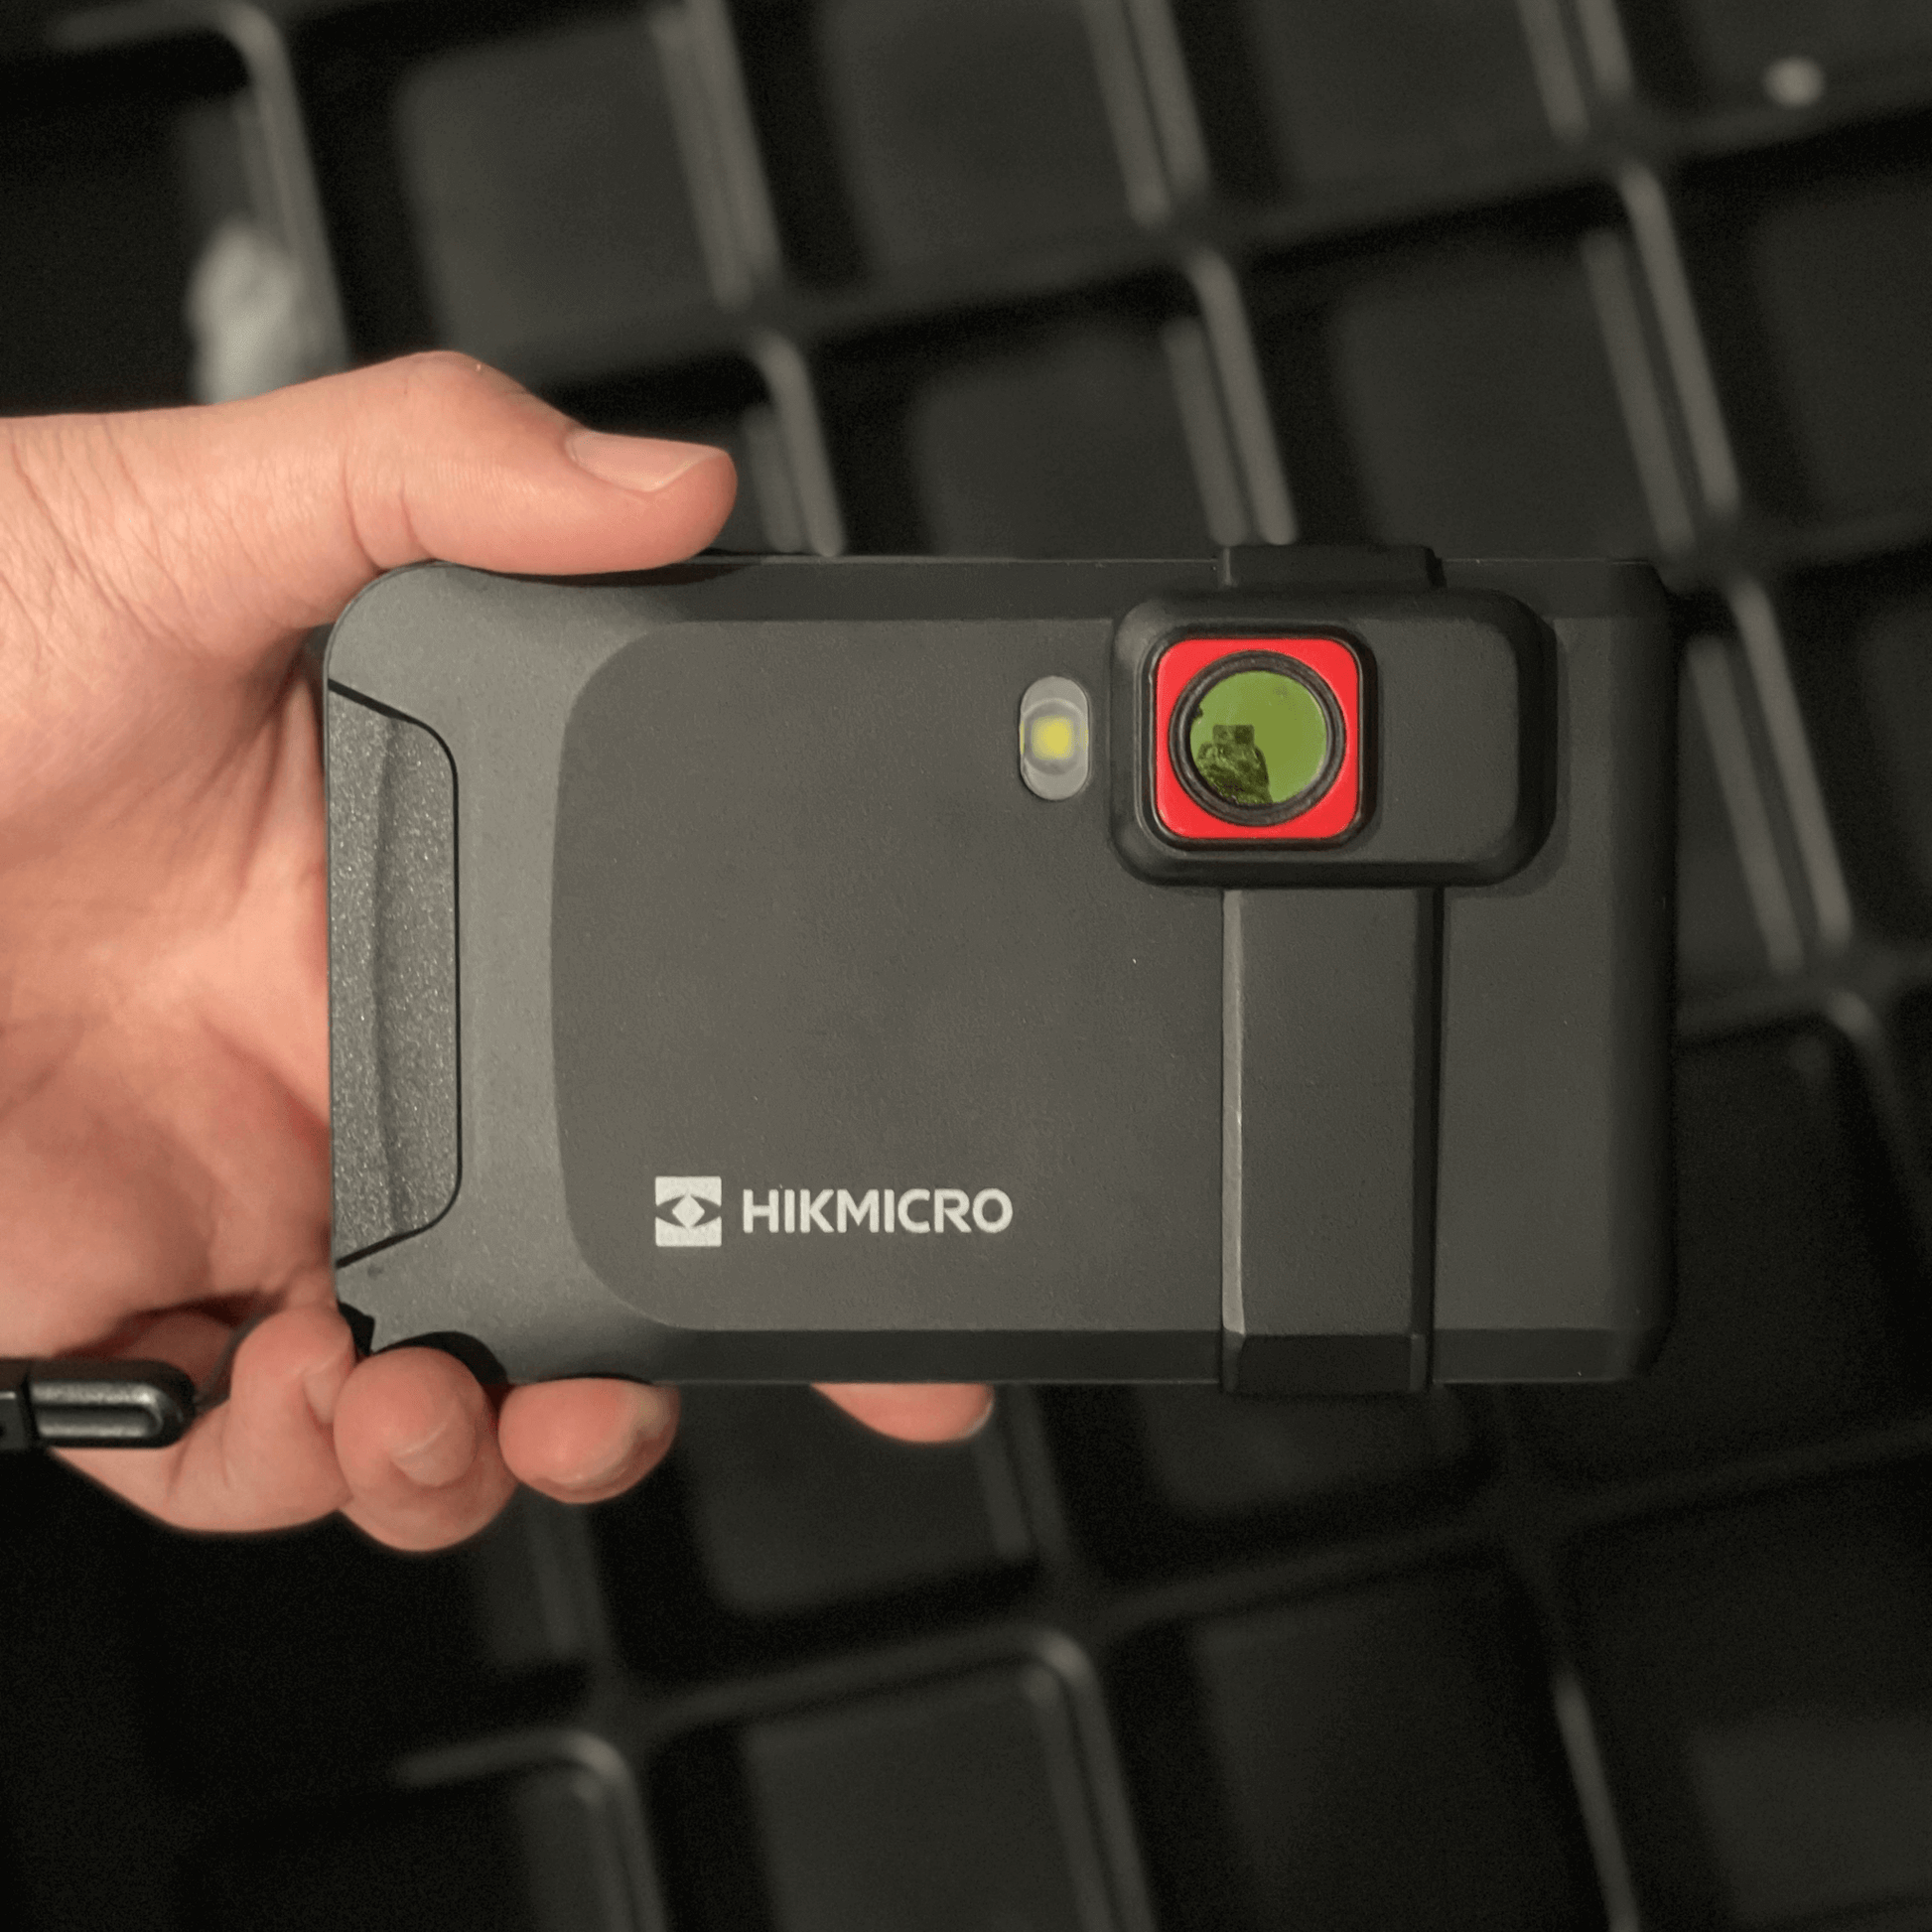 Macro Lens for the HikMicro Pocket Series Handheld Thermal Camera Attached to Device